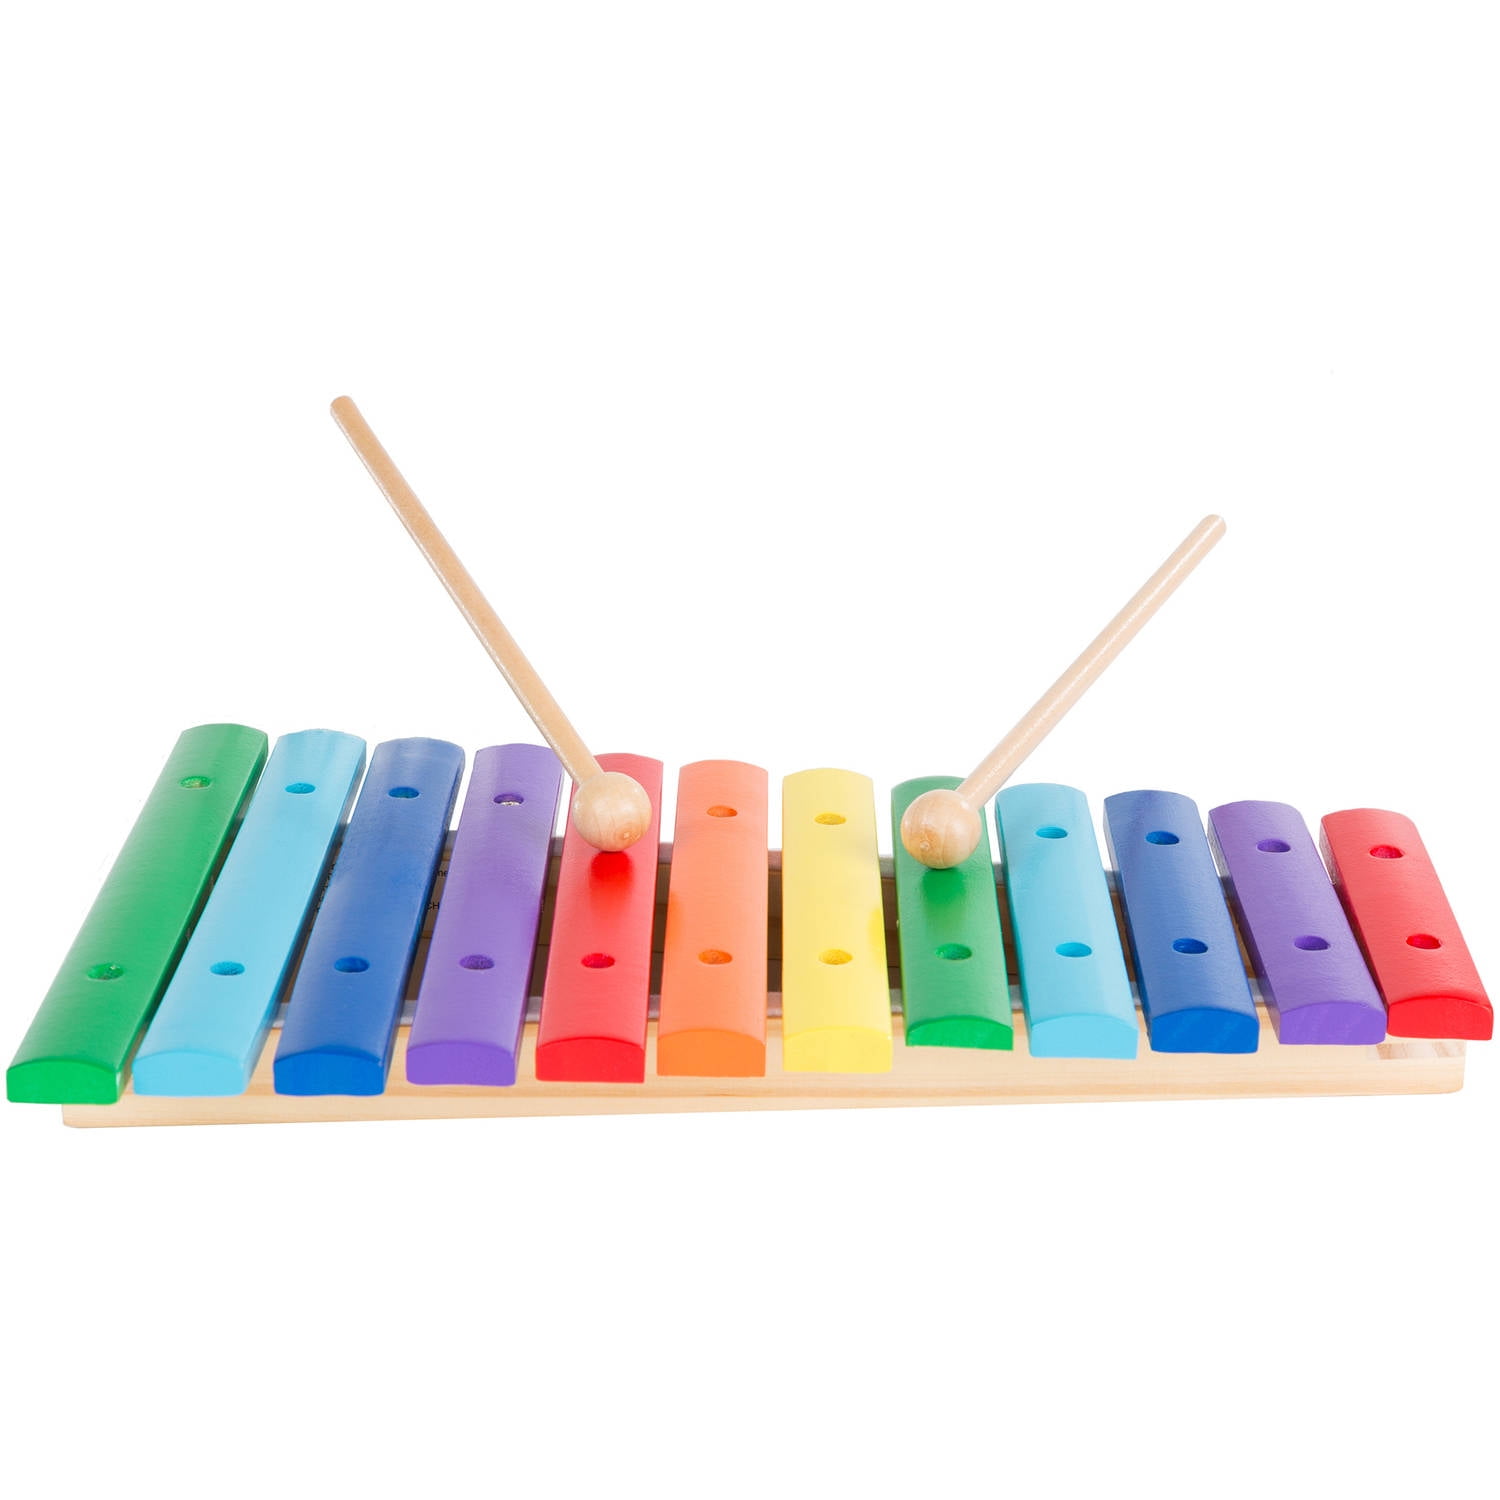 Stangent Rainbow Wooden Xylophone，Musical Development Toys for Kids Preschool Learning Multi-Colored Percussion Instrument with 2 Mallets 